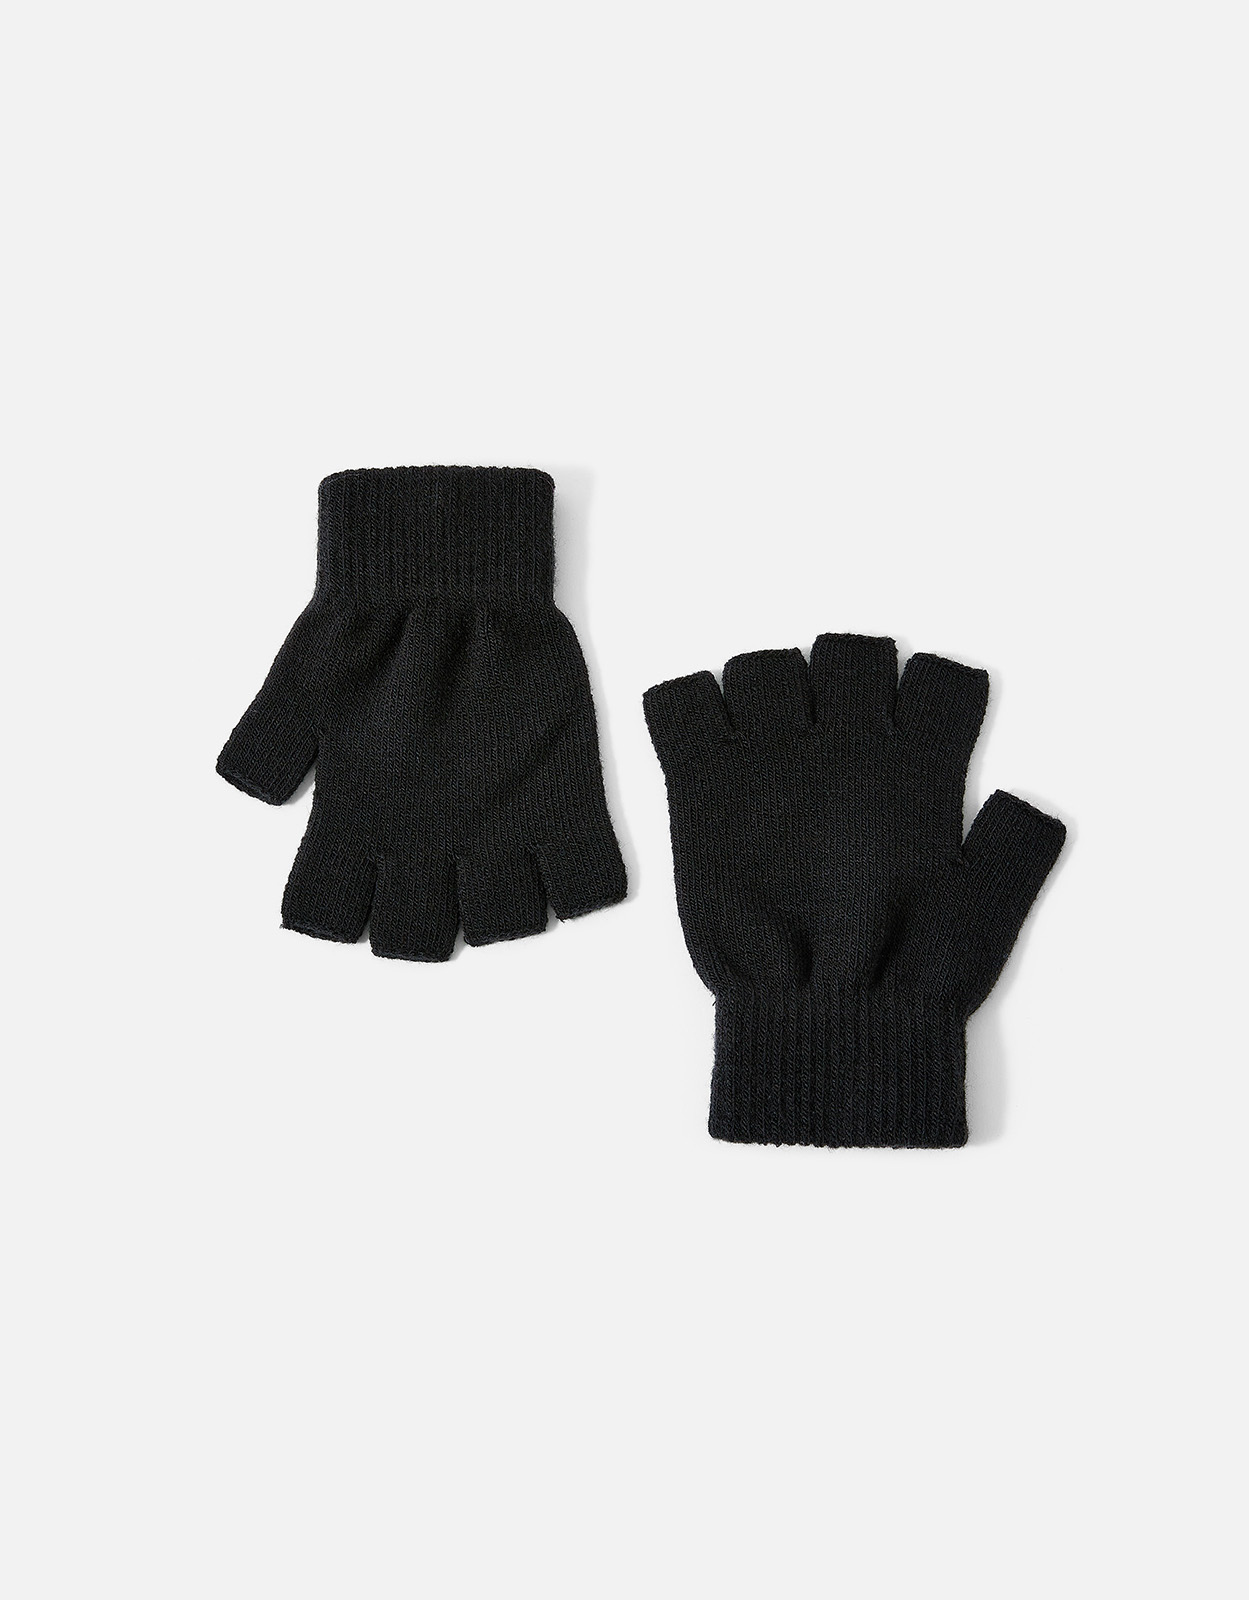 Accessorize Black Fingerless Soft Knitted Gloves, Size: 16x9cm